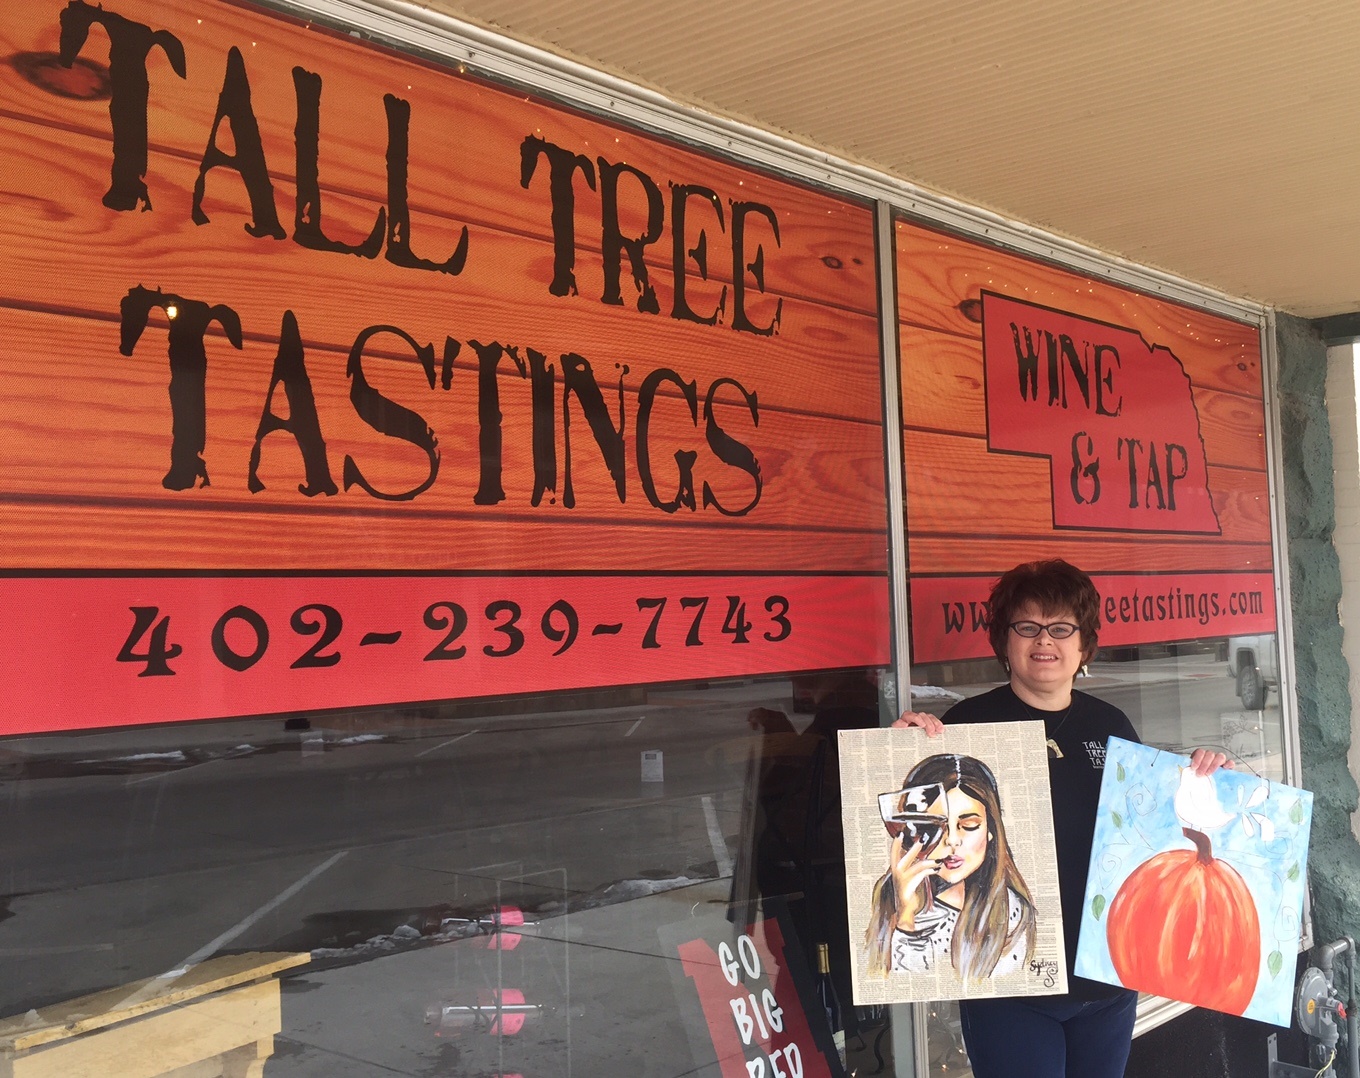 Tall Tree Tastings - A New Business & Success Story Main Photo